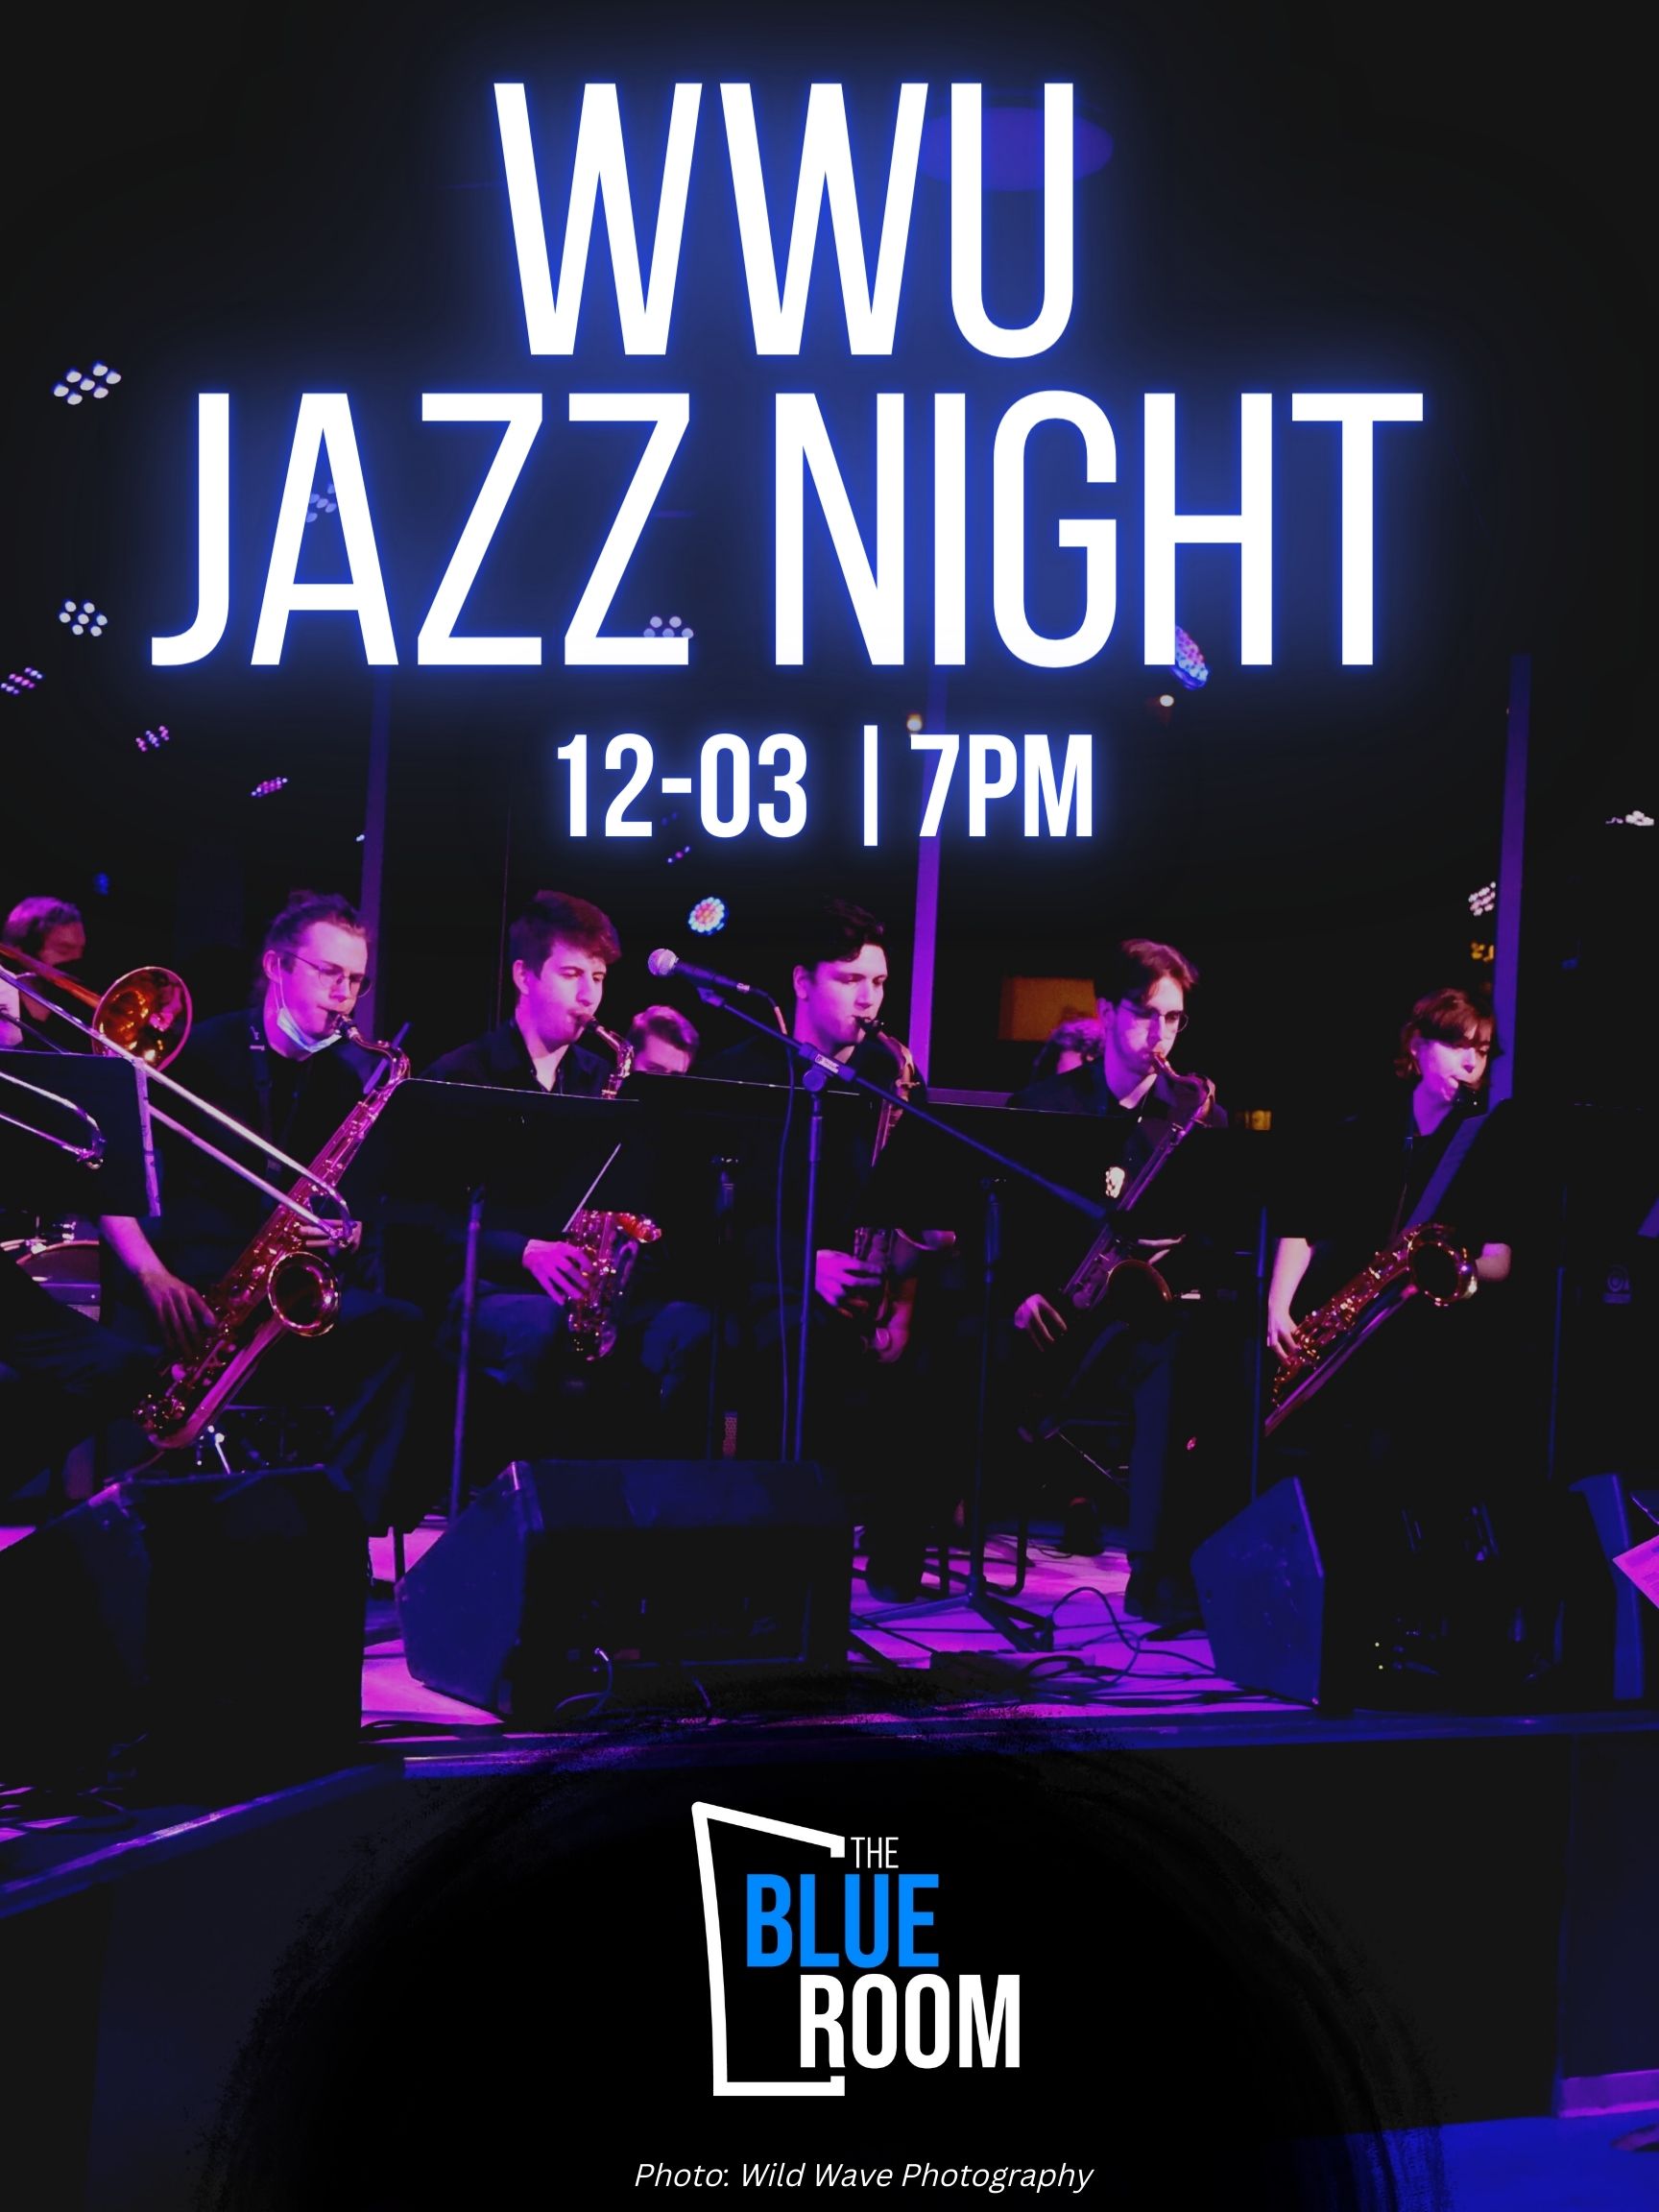 Event poster showing a group of saxophone players on a blue and purple-lit stage